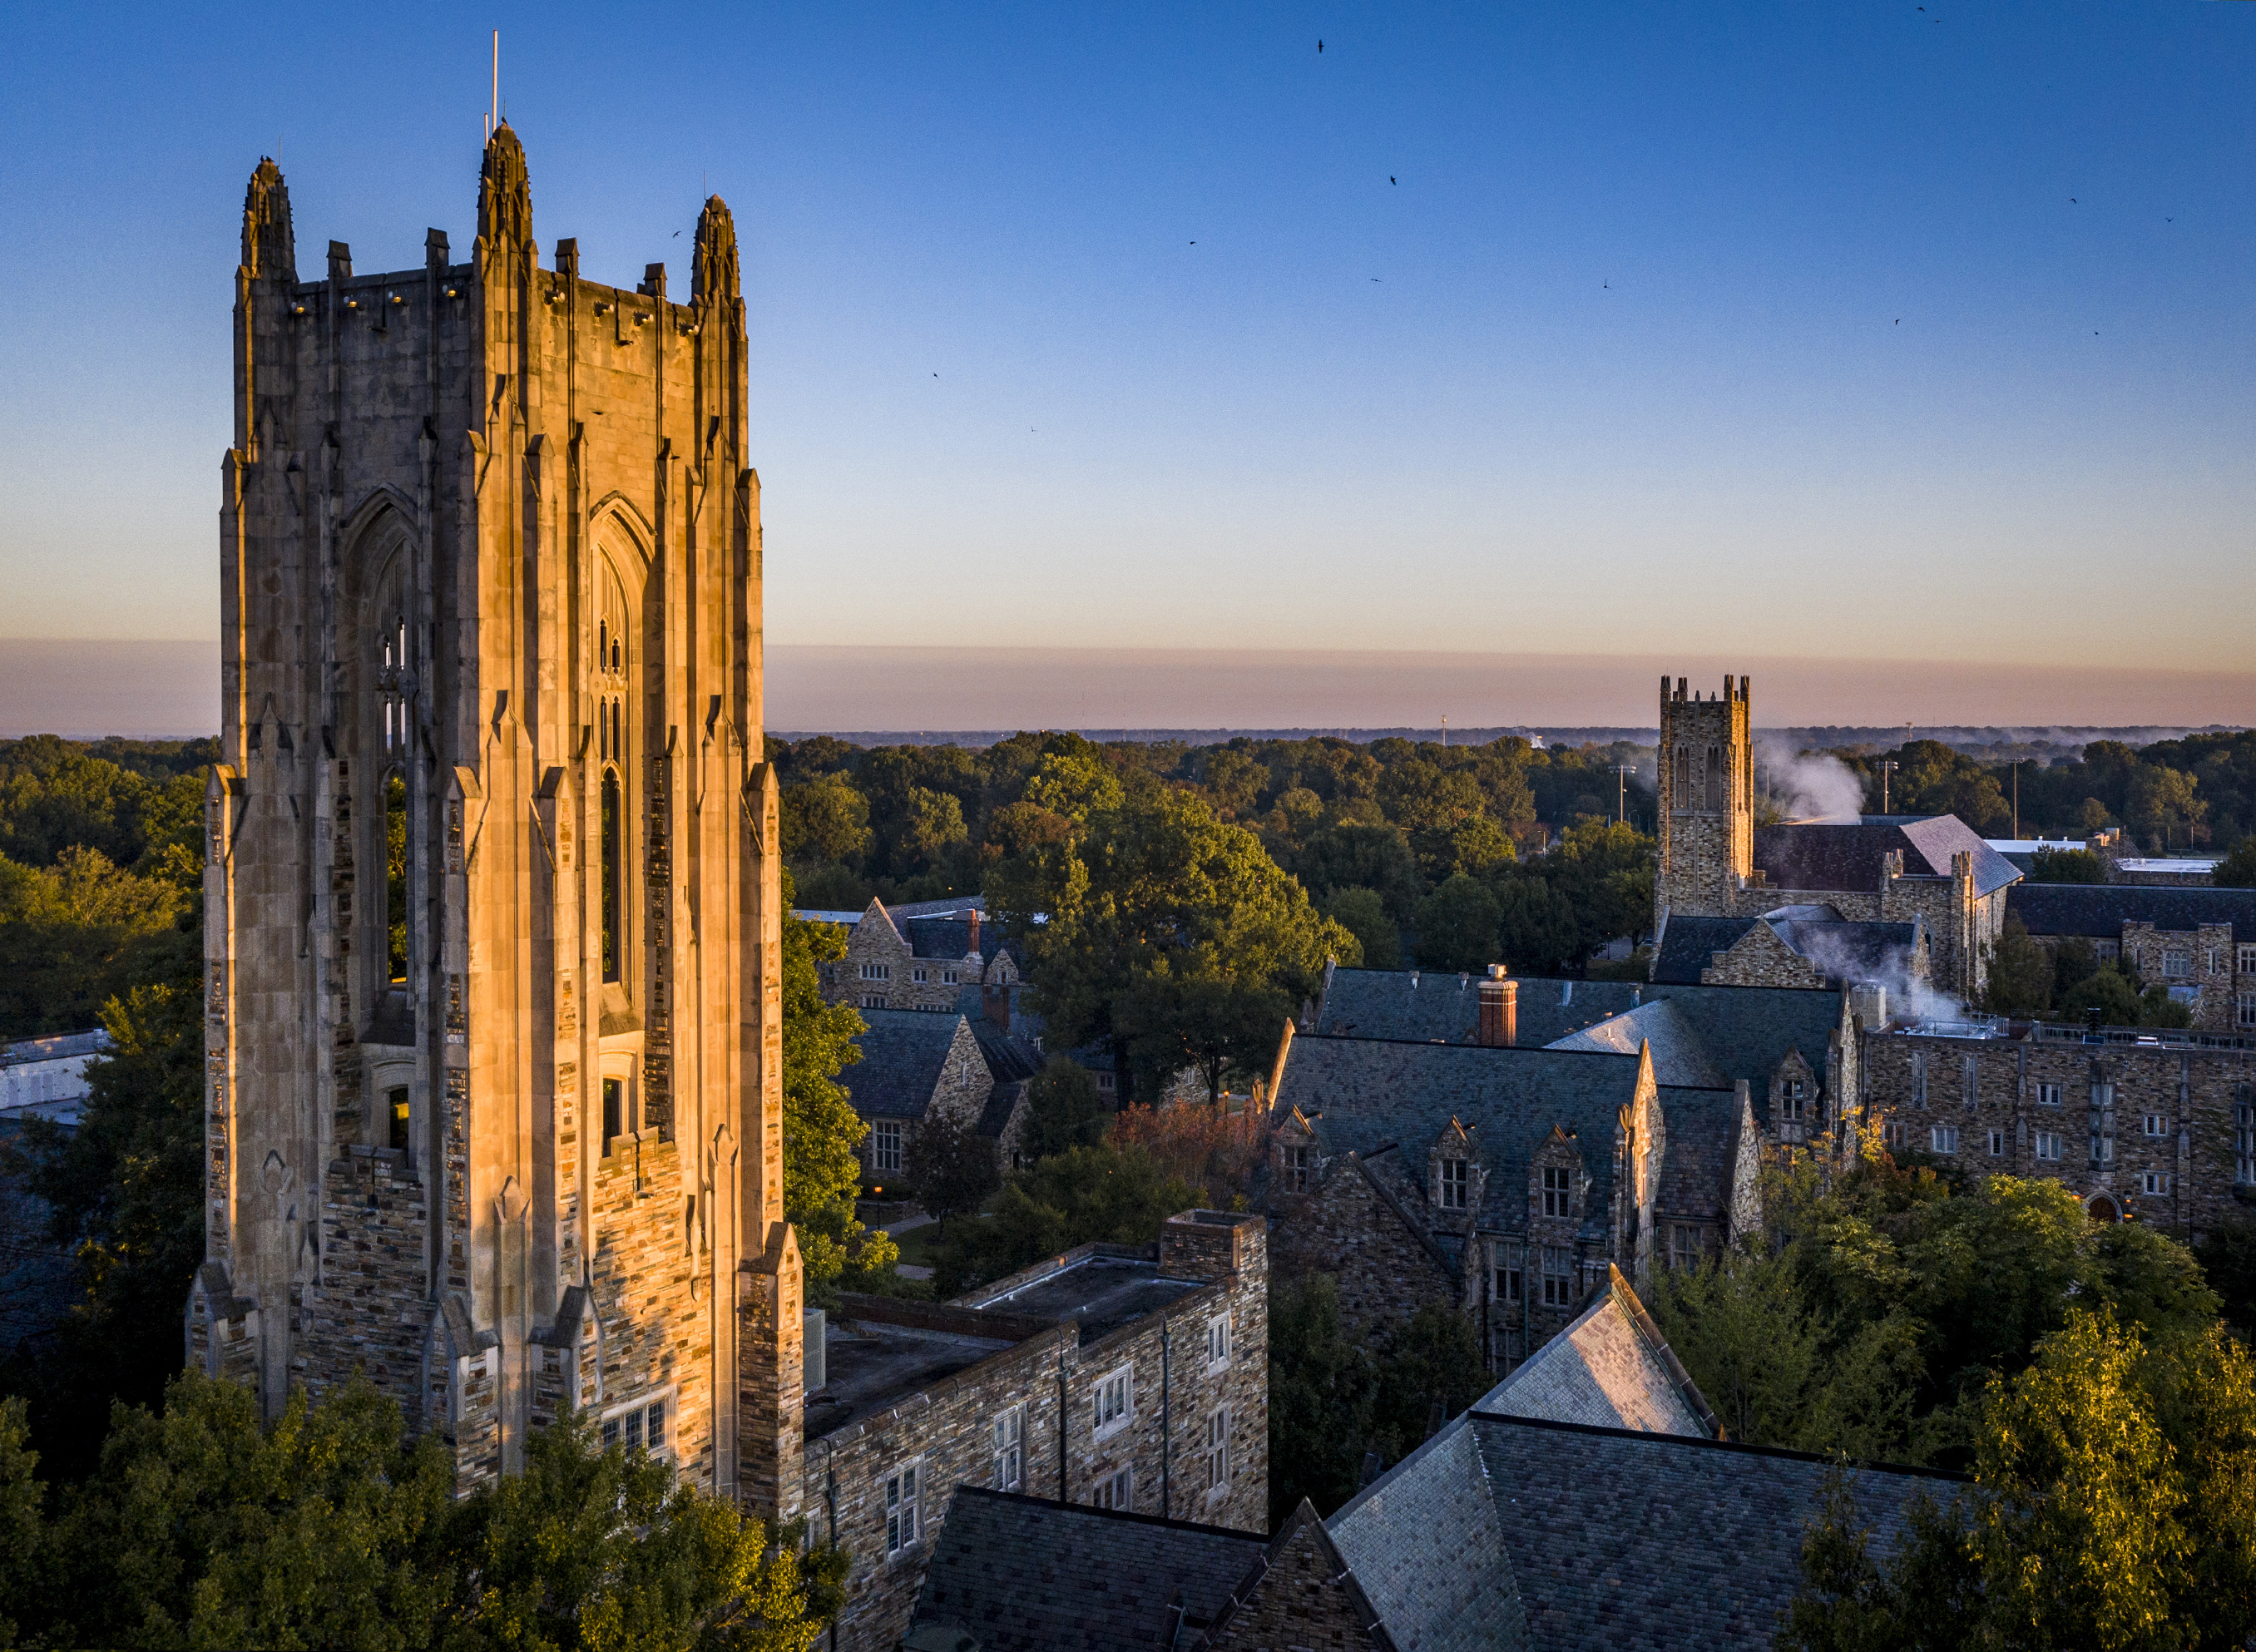 a tall Collegiate Gothic tower surrounded by stone buildings